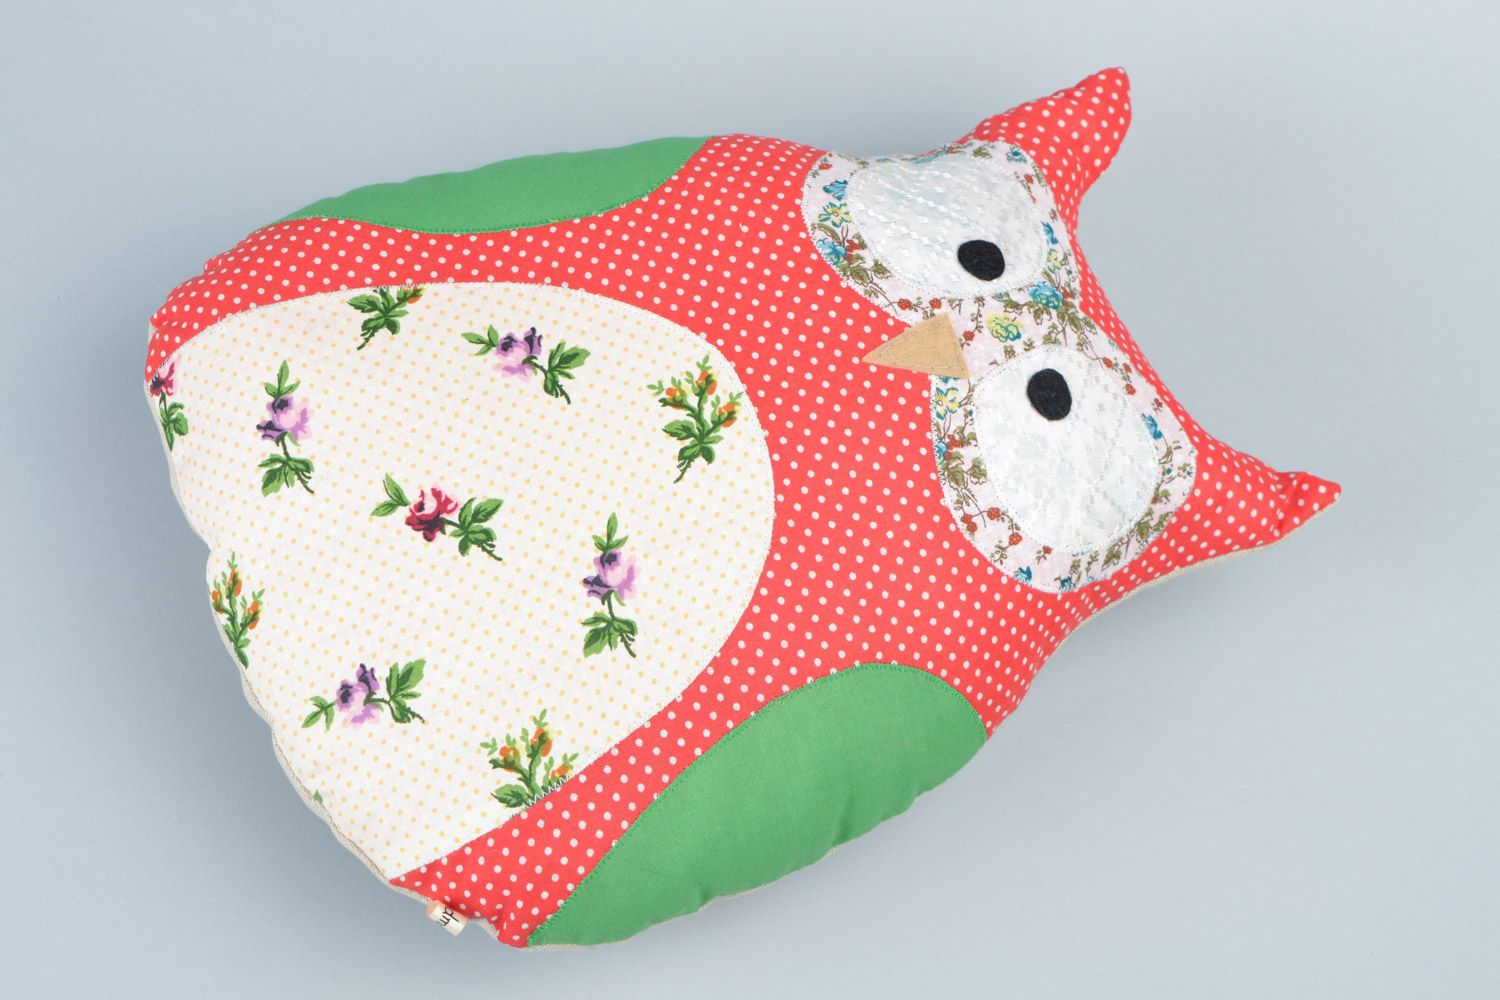 Handmade soft pillow pet sewn of cotton fabric in the shape of colorful owl photo 3